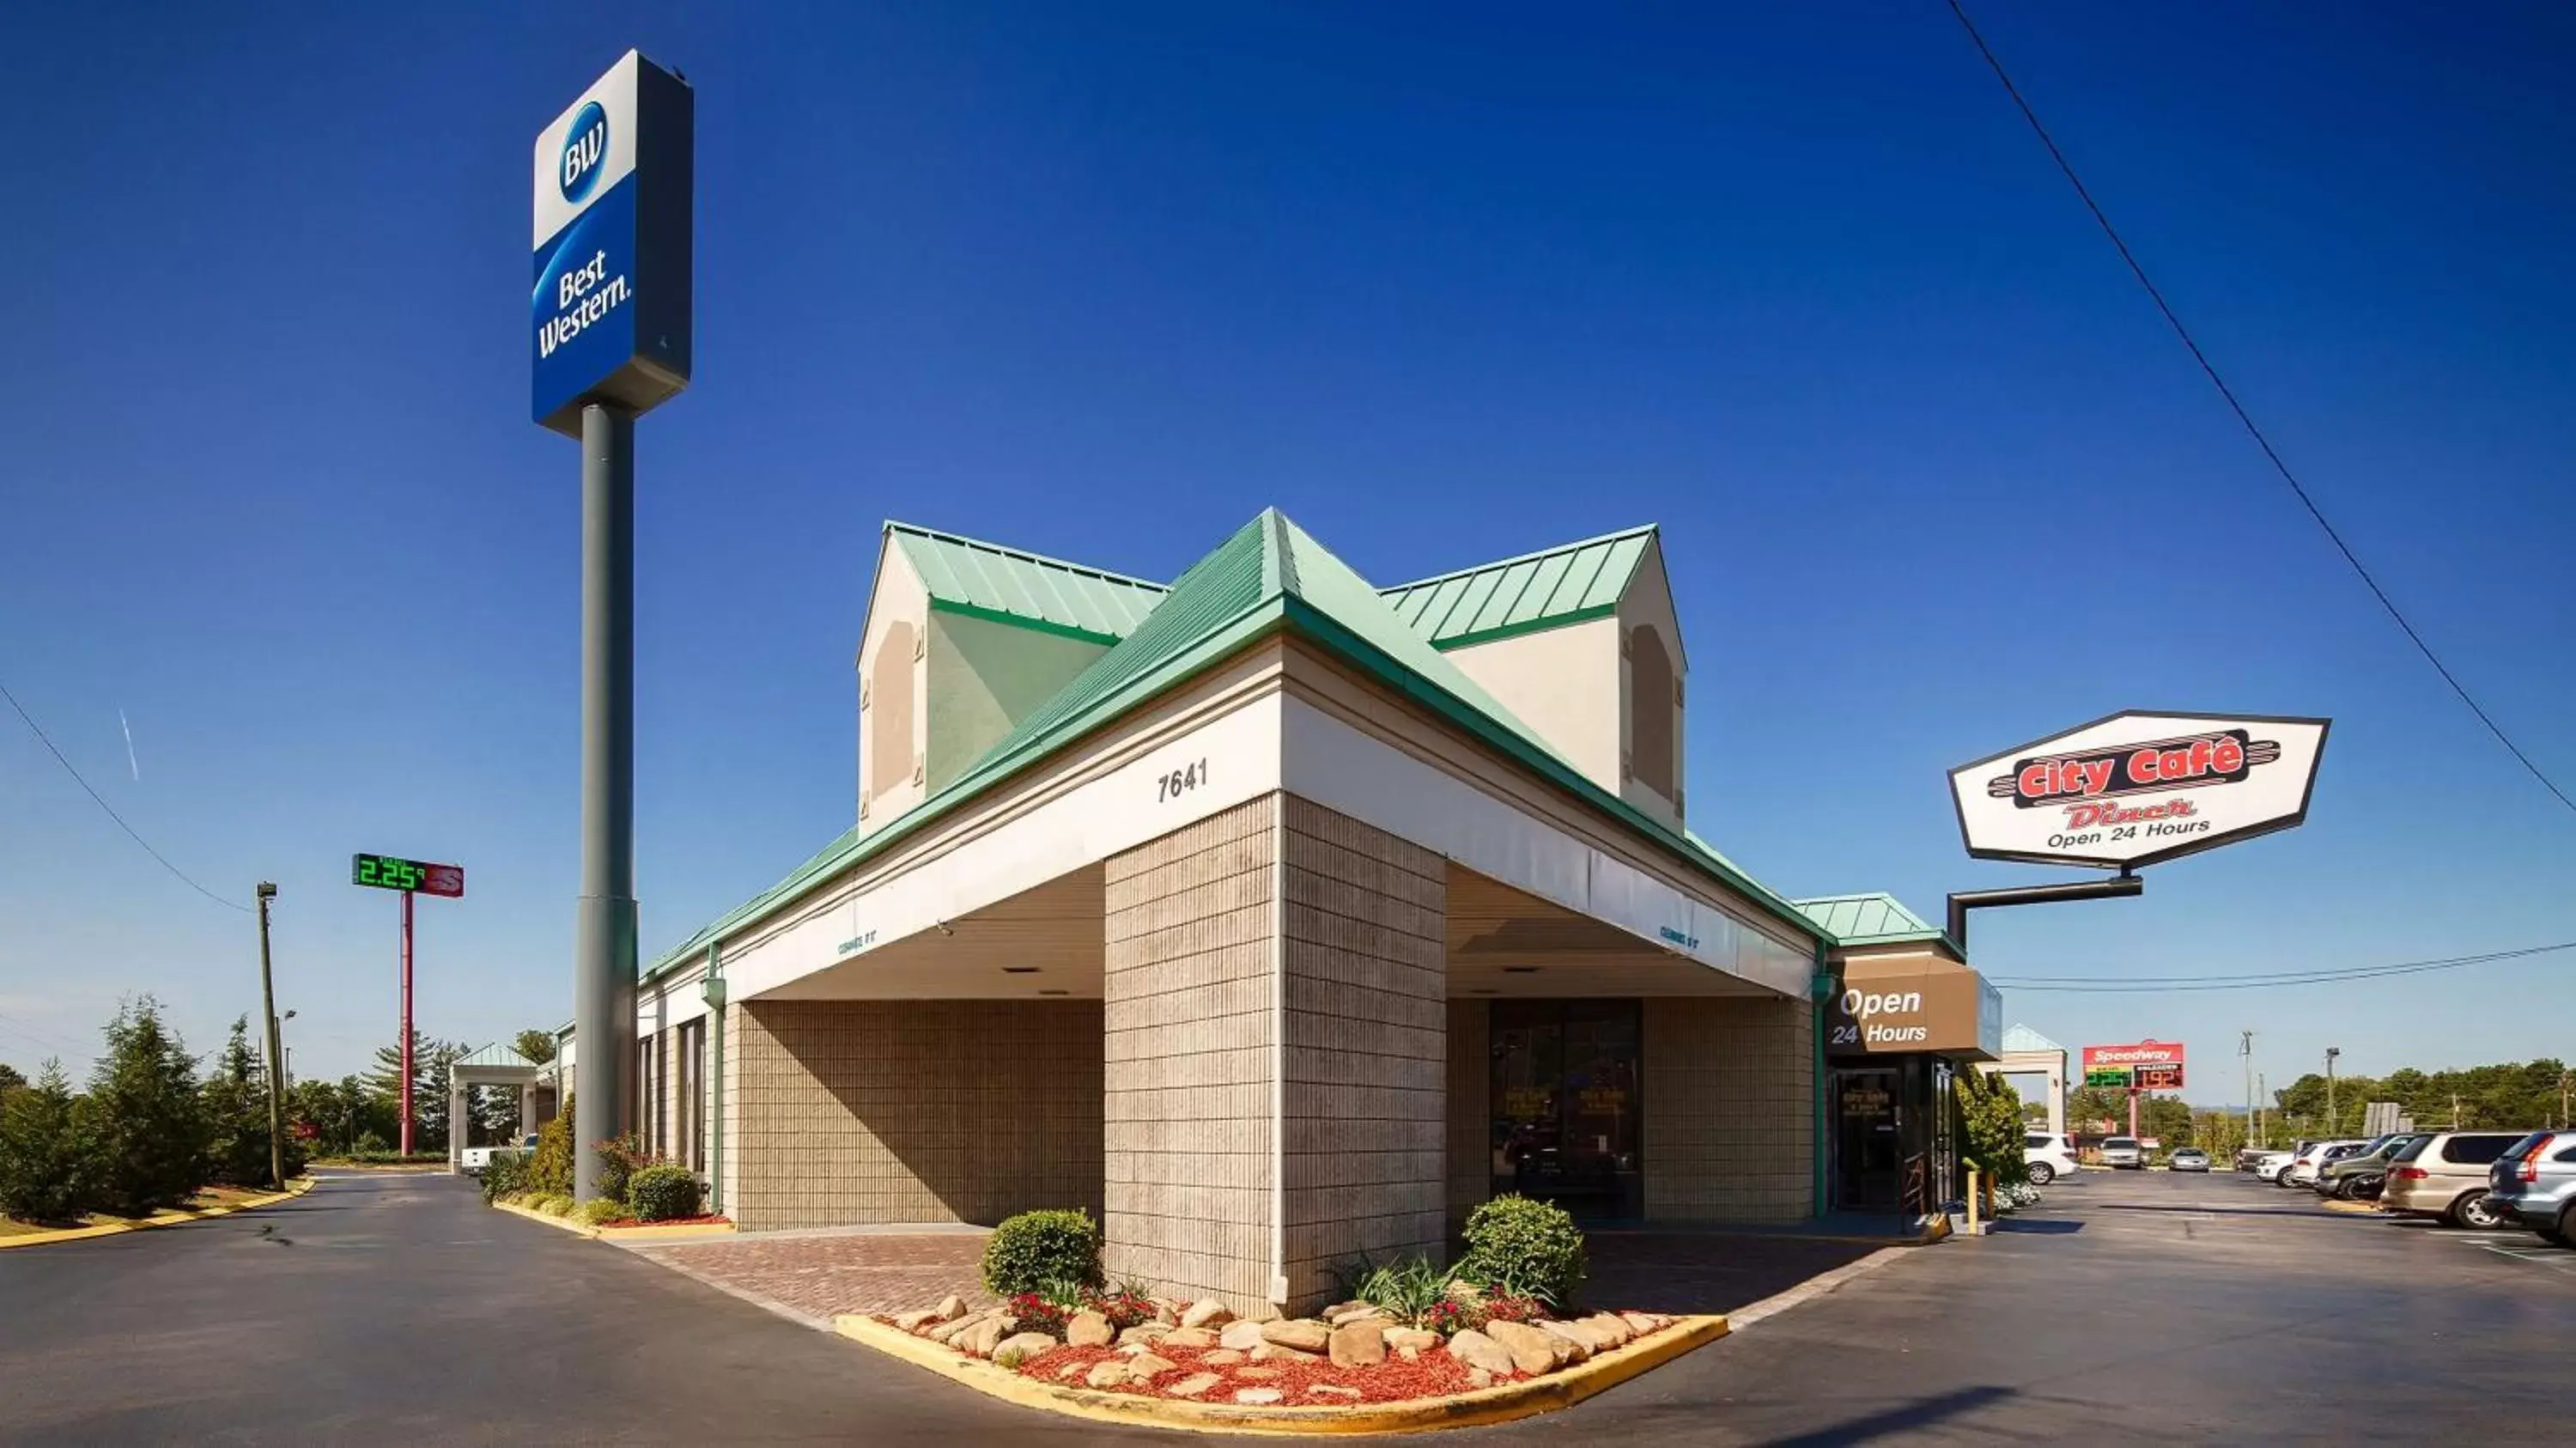 Property Building in Best Western Heritage Inn - Chattanooga